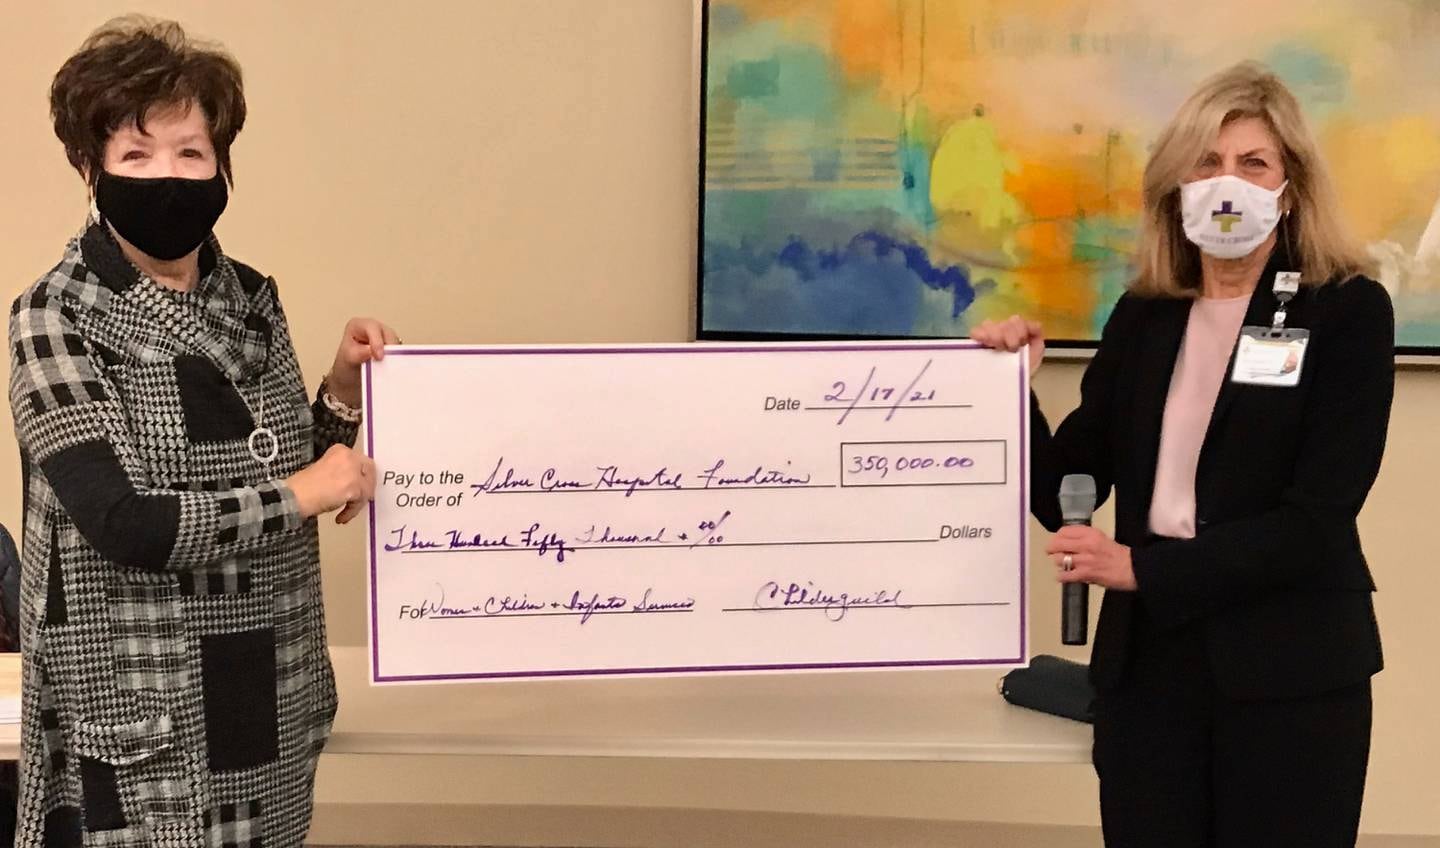 Childerguild President Pam Resutko (left) presented Silver Cross Hospital President & CEO Ruth Colby with a check for $350,000 on Feb. 19 to fund help fund women and children services including Will County’s first neonatal intensive care unit.